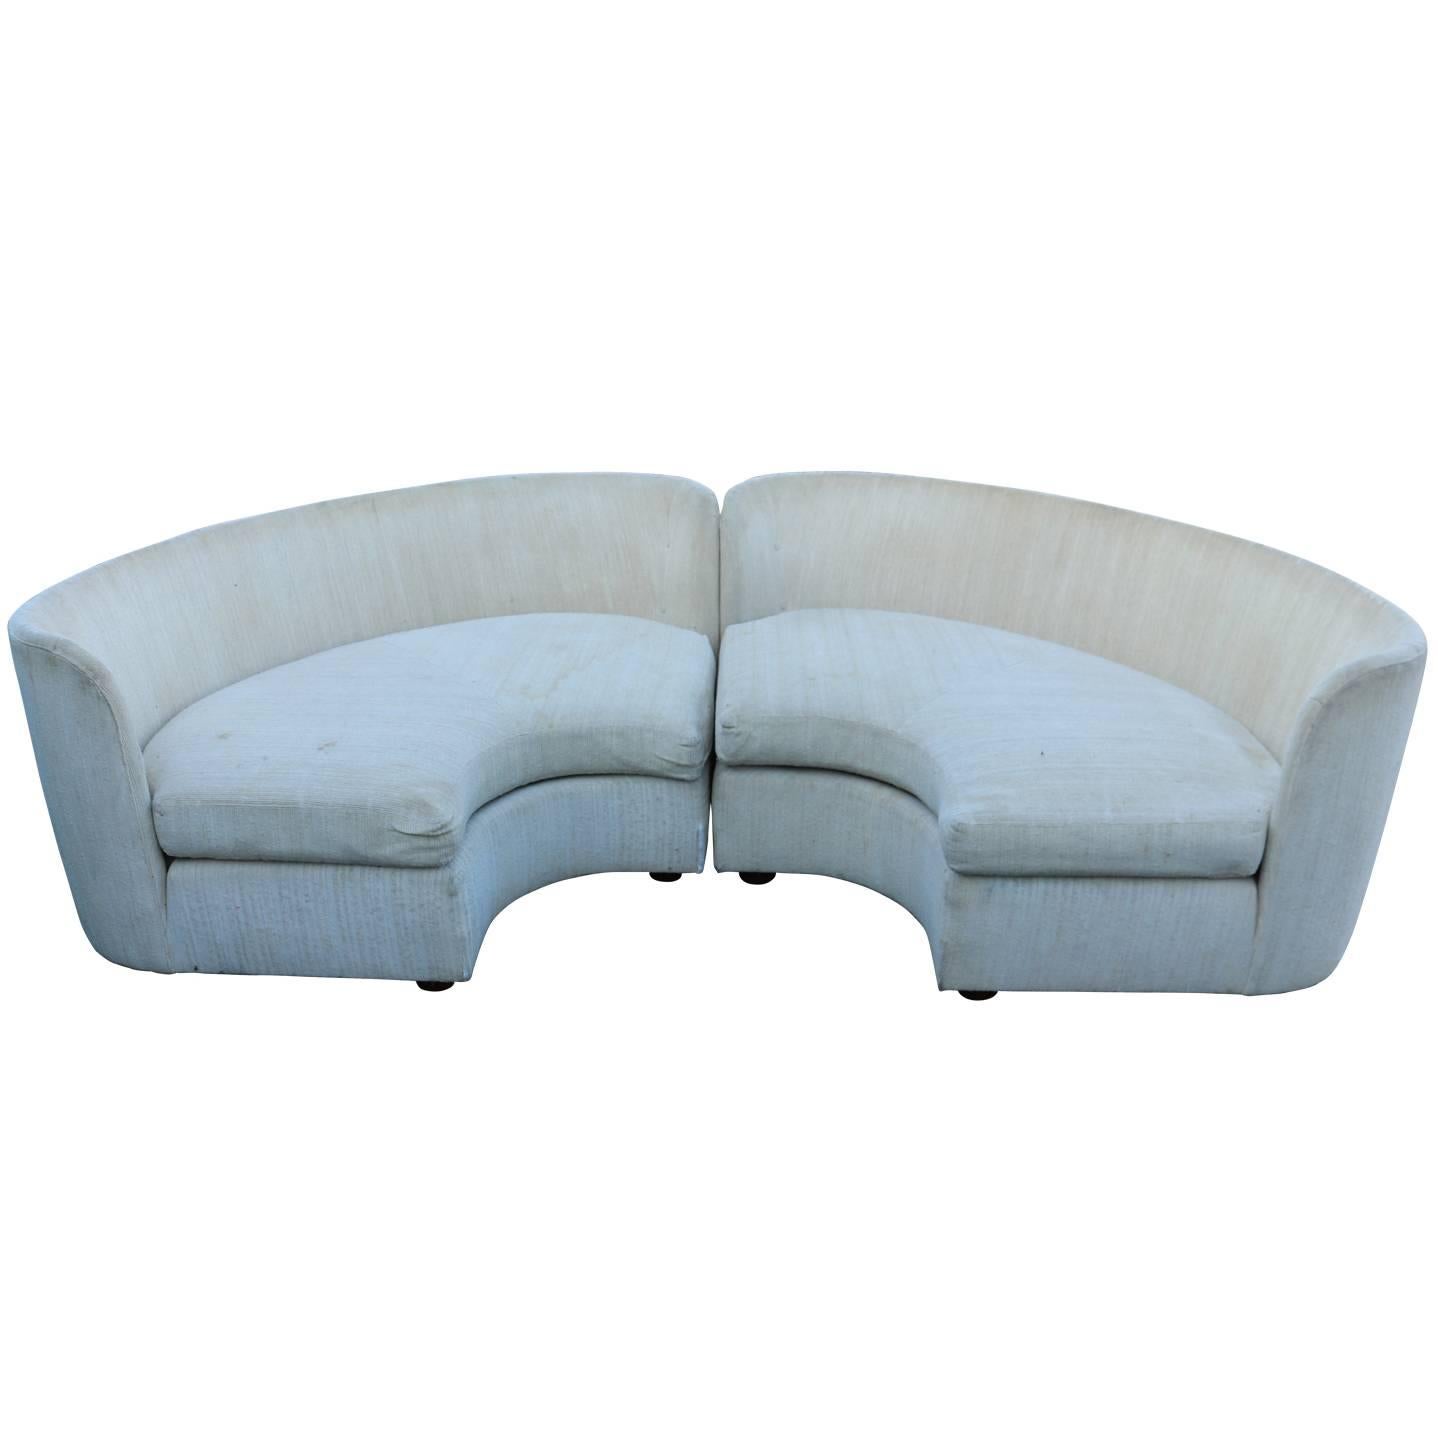 Pair of Curved Semi Circular Sofas by Henrendon